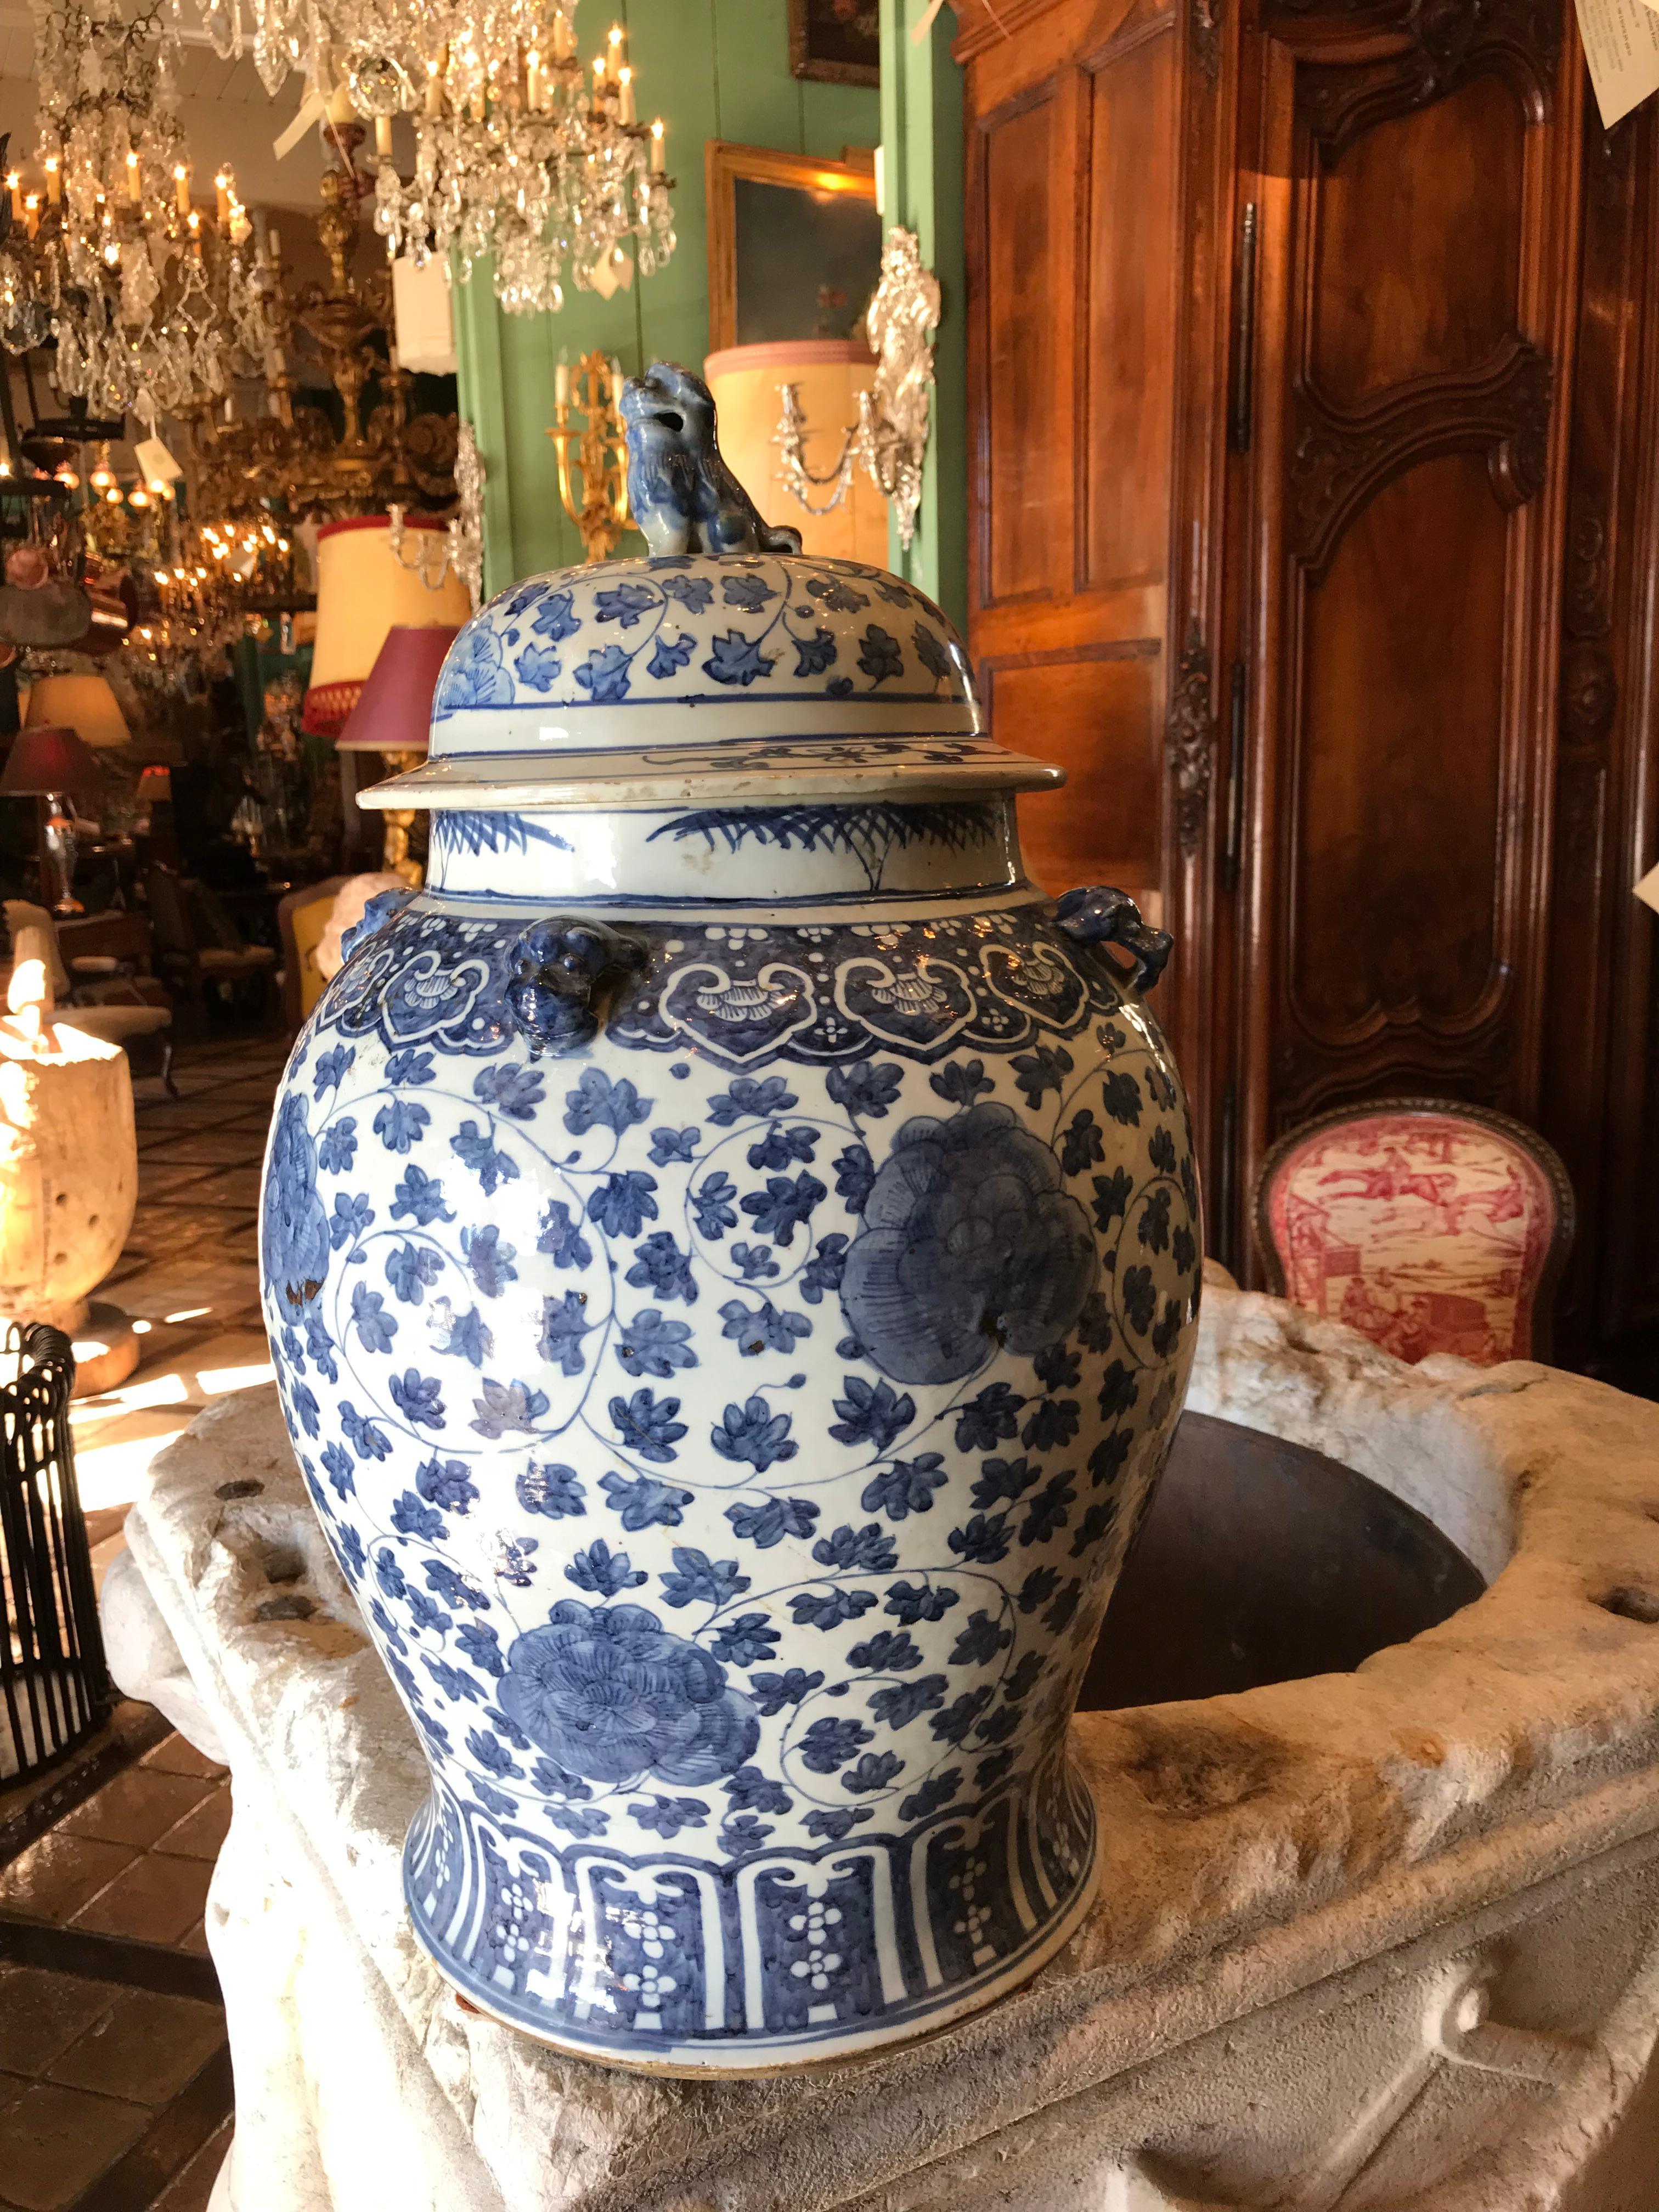 Important 1st quarter 19th century Circa 1800-1825 blue & white Chinoiserie China lidded temple jar Antiques depicting chrysanthemums flowers and leaves . Chrysanthemums, which symbolize happiness and vitality, are a popular autumn flower in China